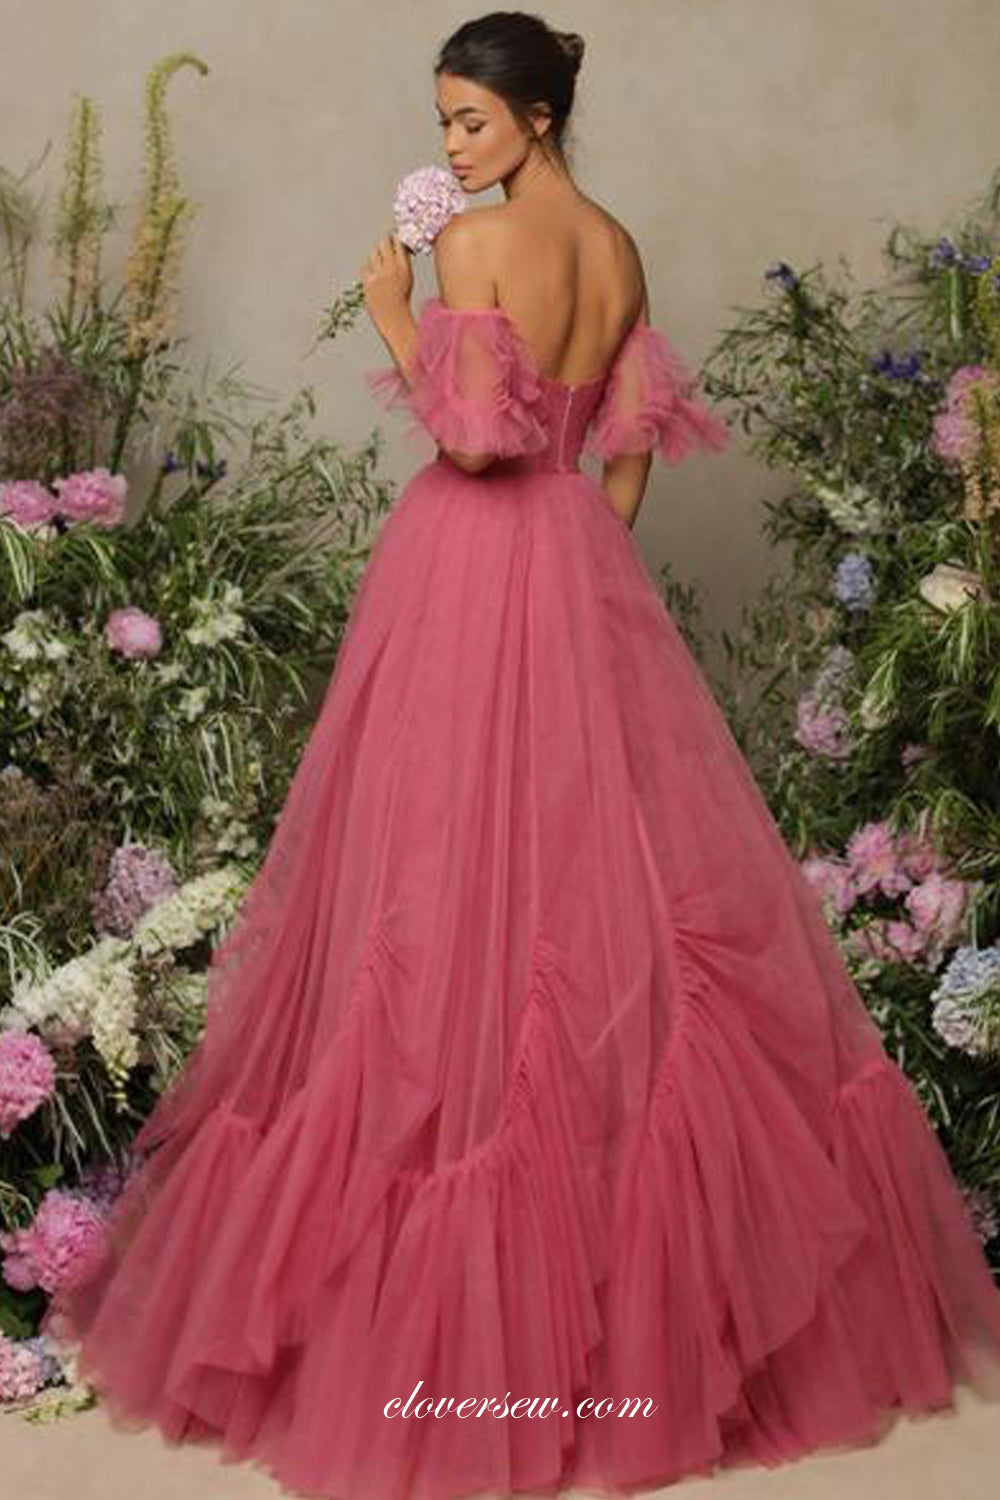 Rosy Pink Tulle Ruffles Off The Shoulder Princess Prom Dresses,CP0971